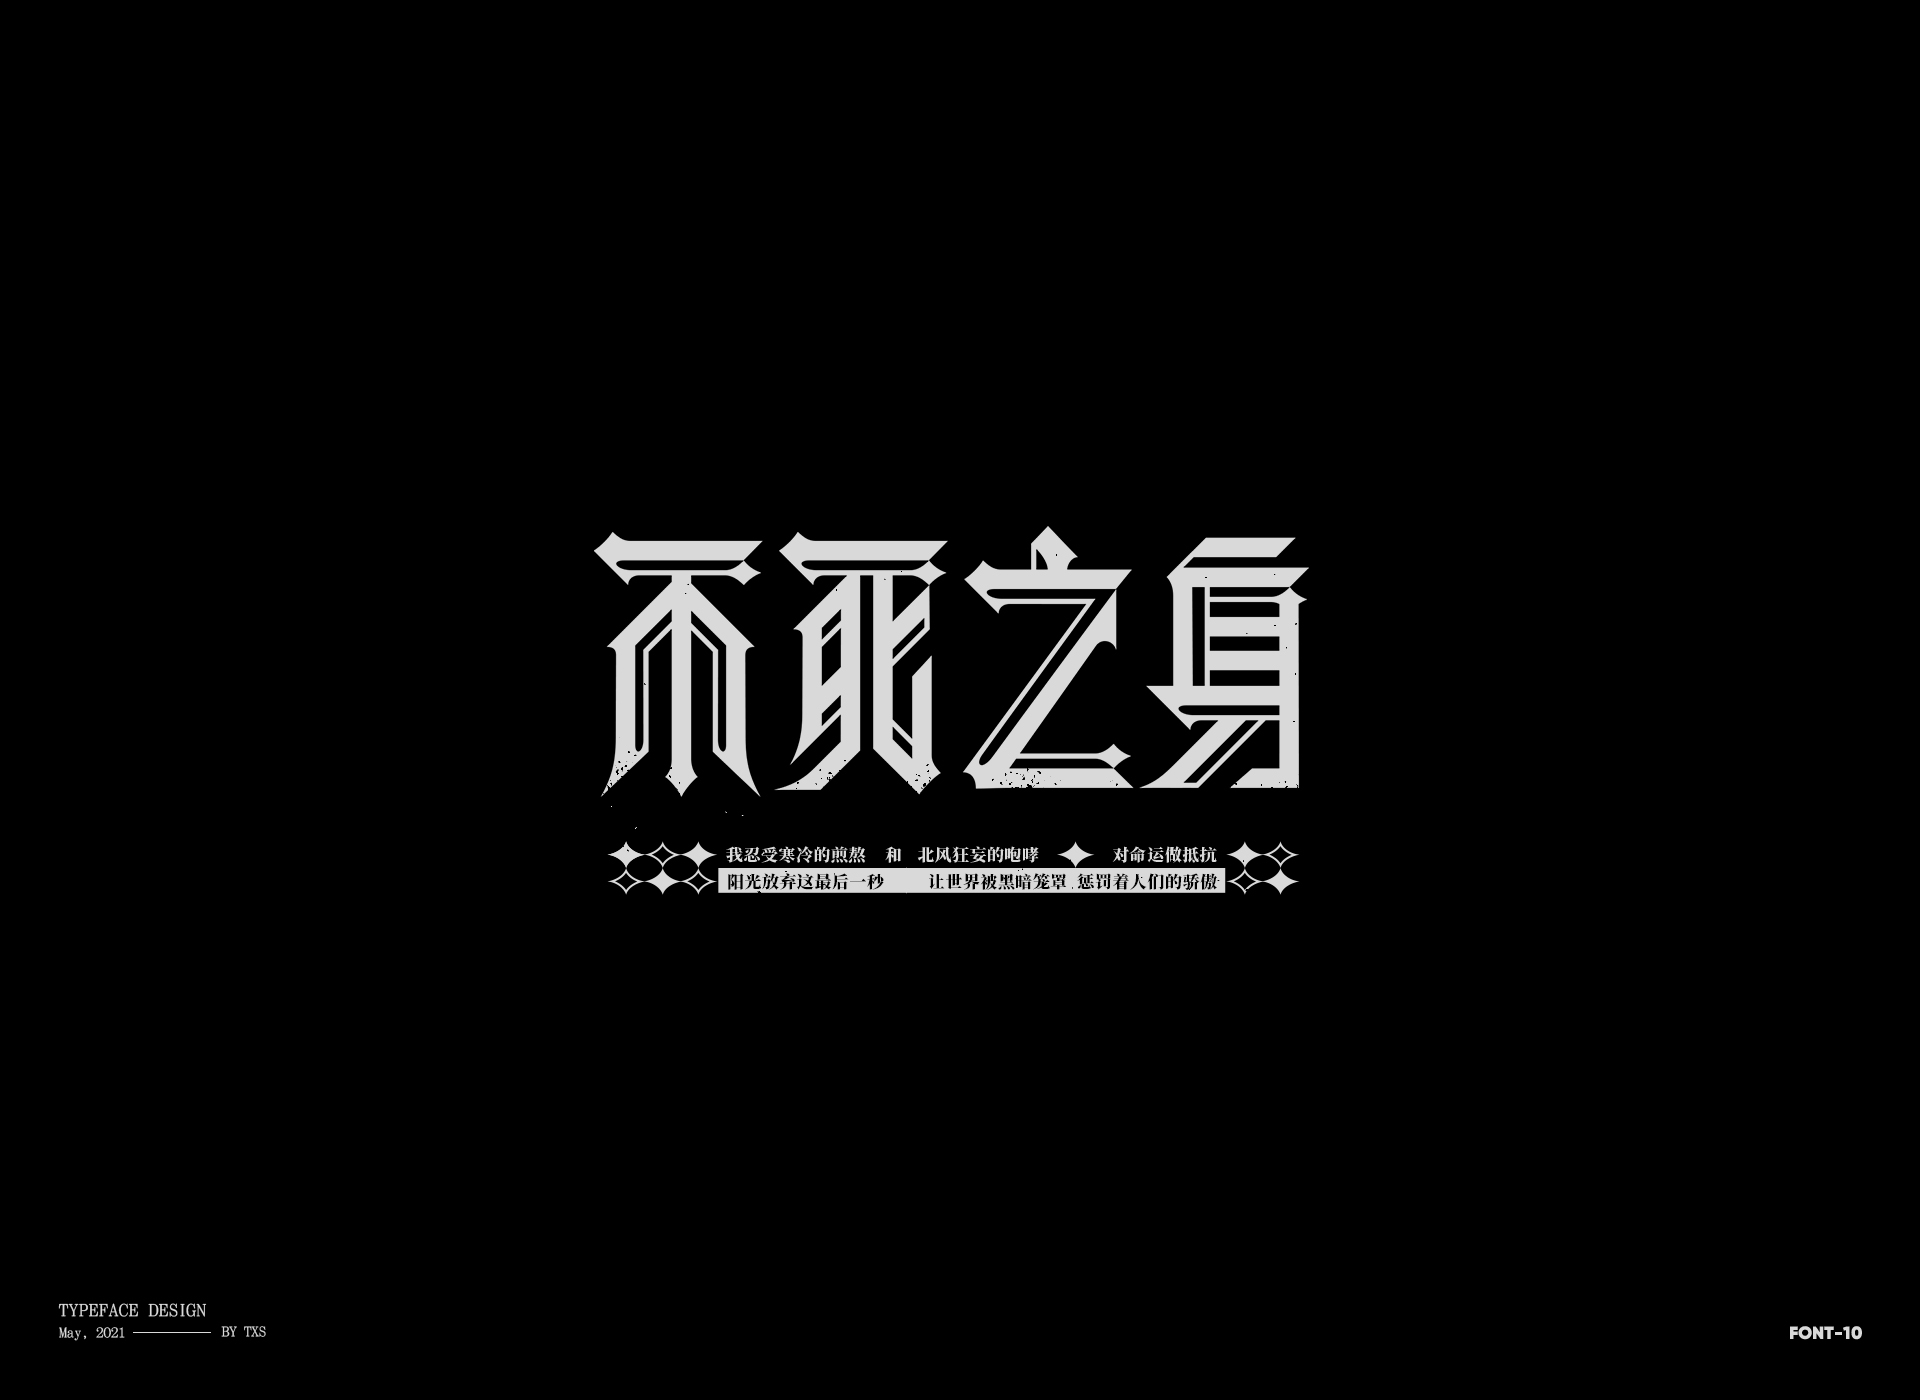 18P Collection of the latest Chinese font design schemes in 2021 #.78